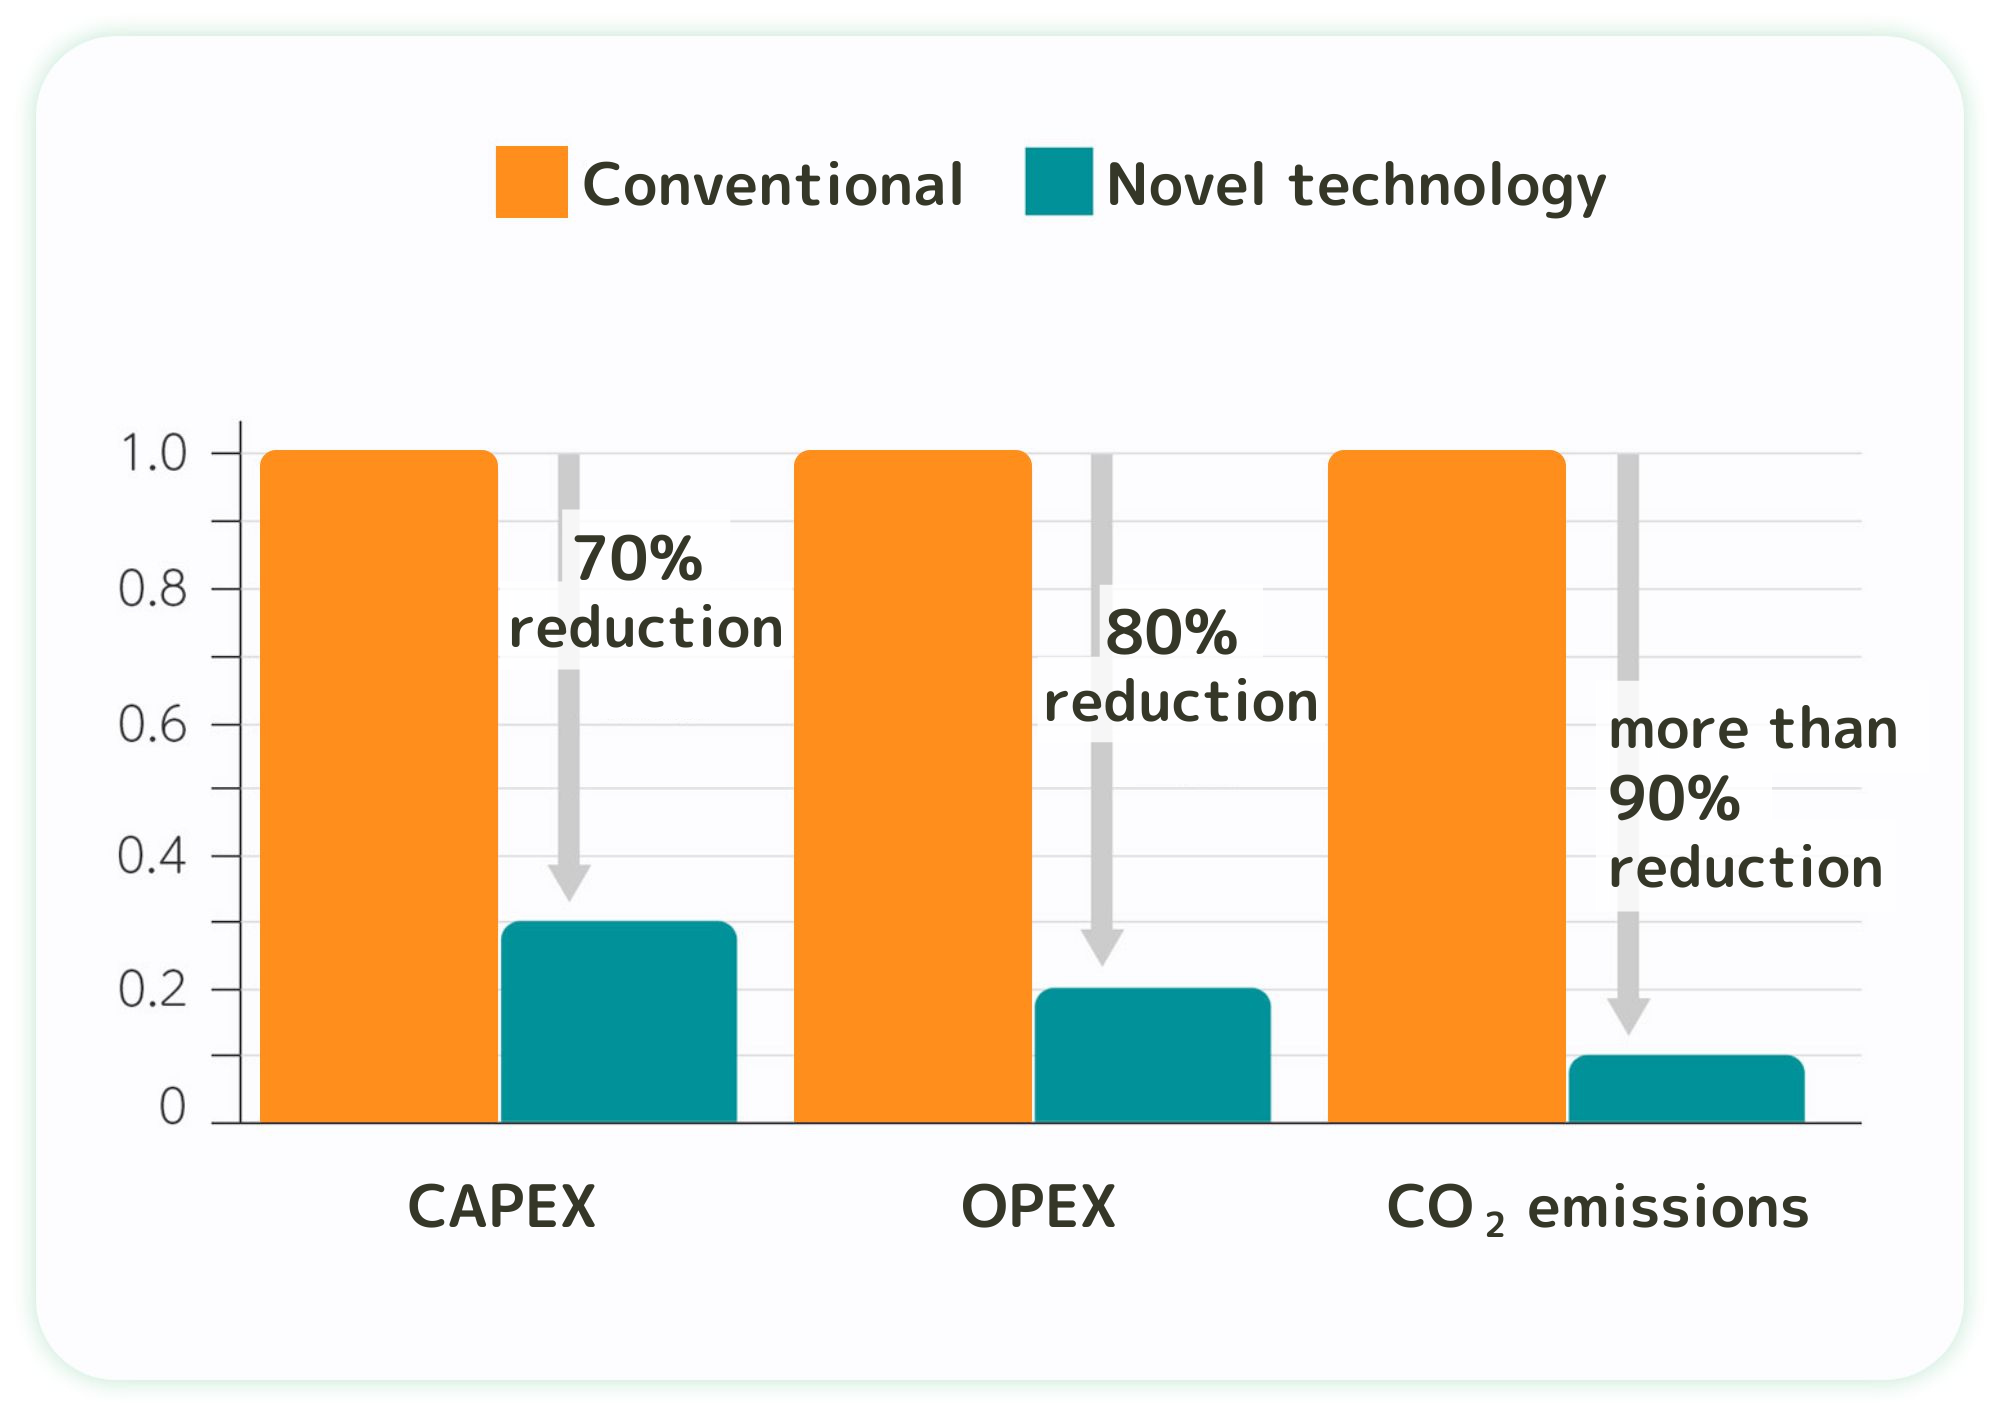 low-temperature refining technology and conventional technology regarding CAPEX, OPEX, and CO2 emissions for lithium ore refining.